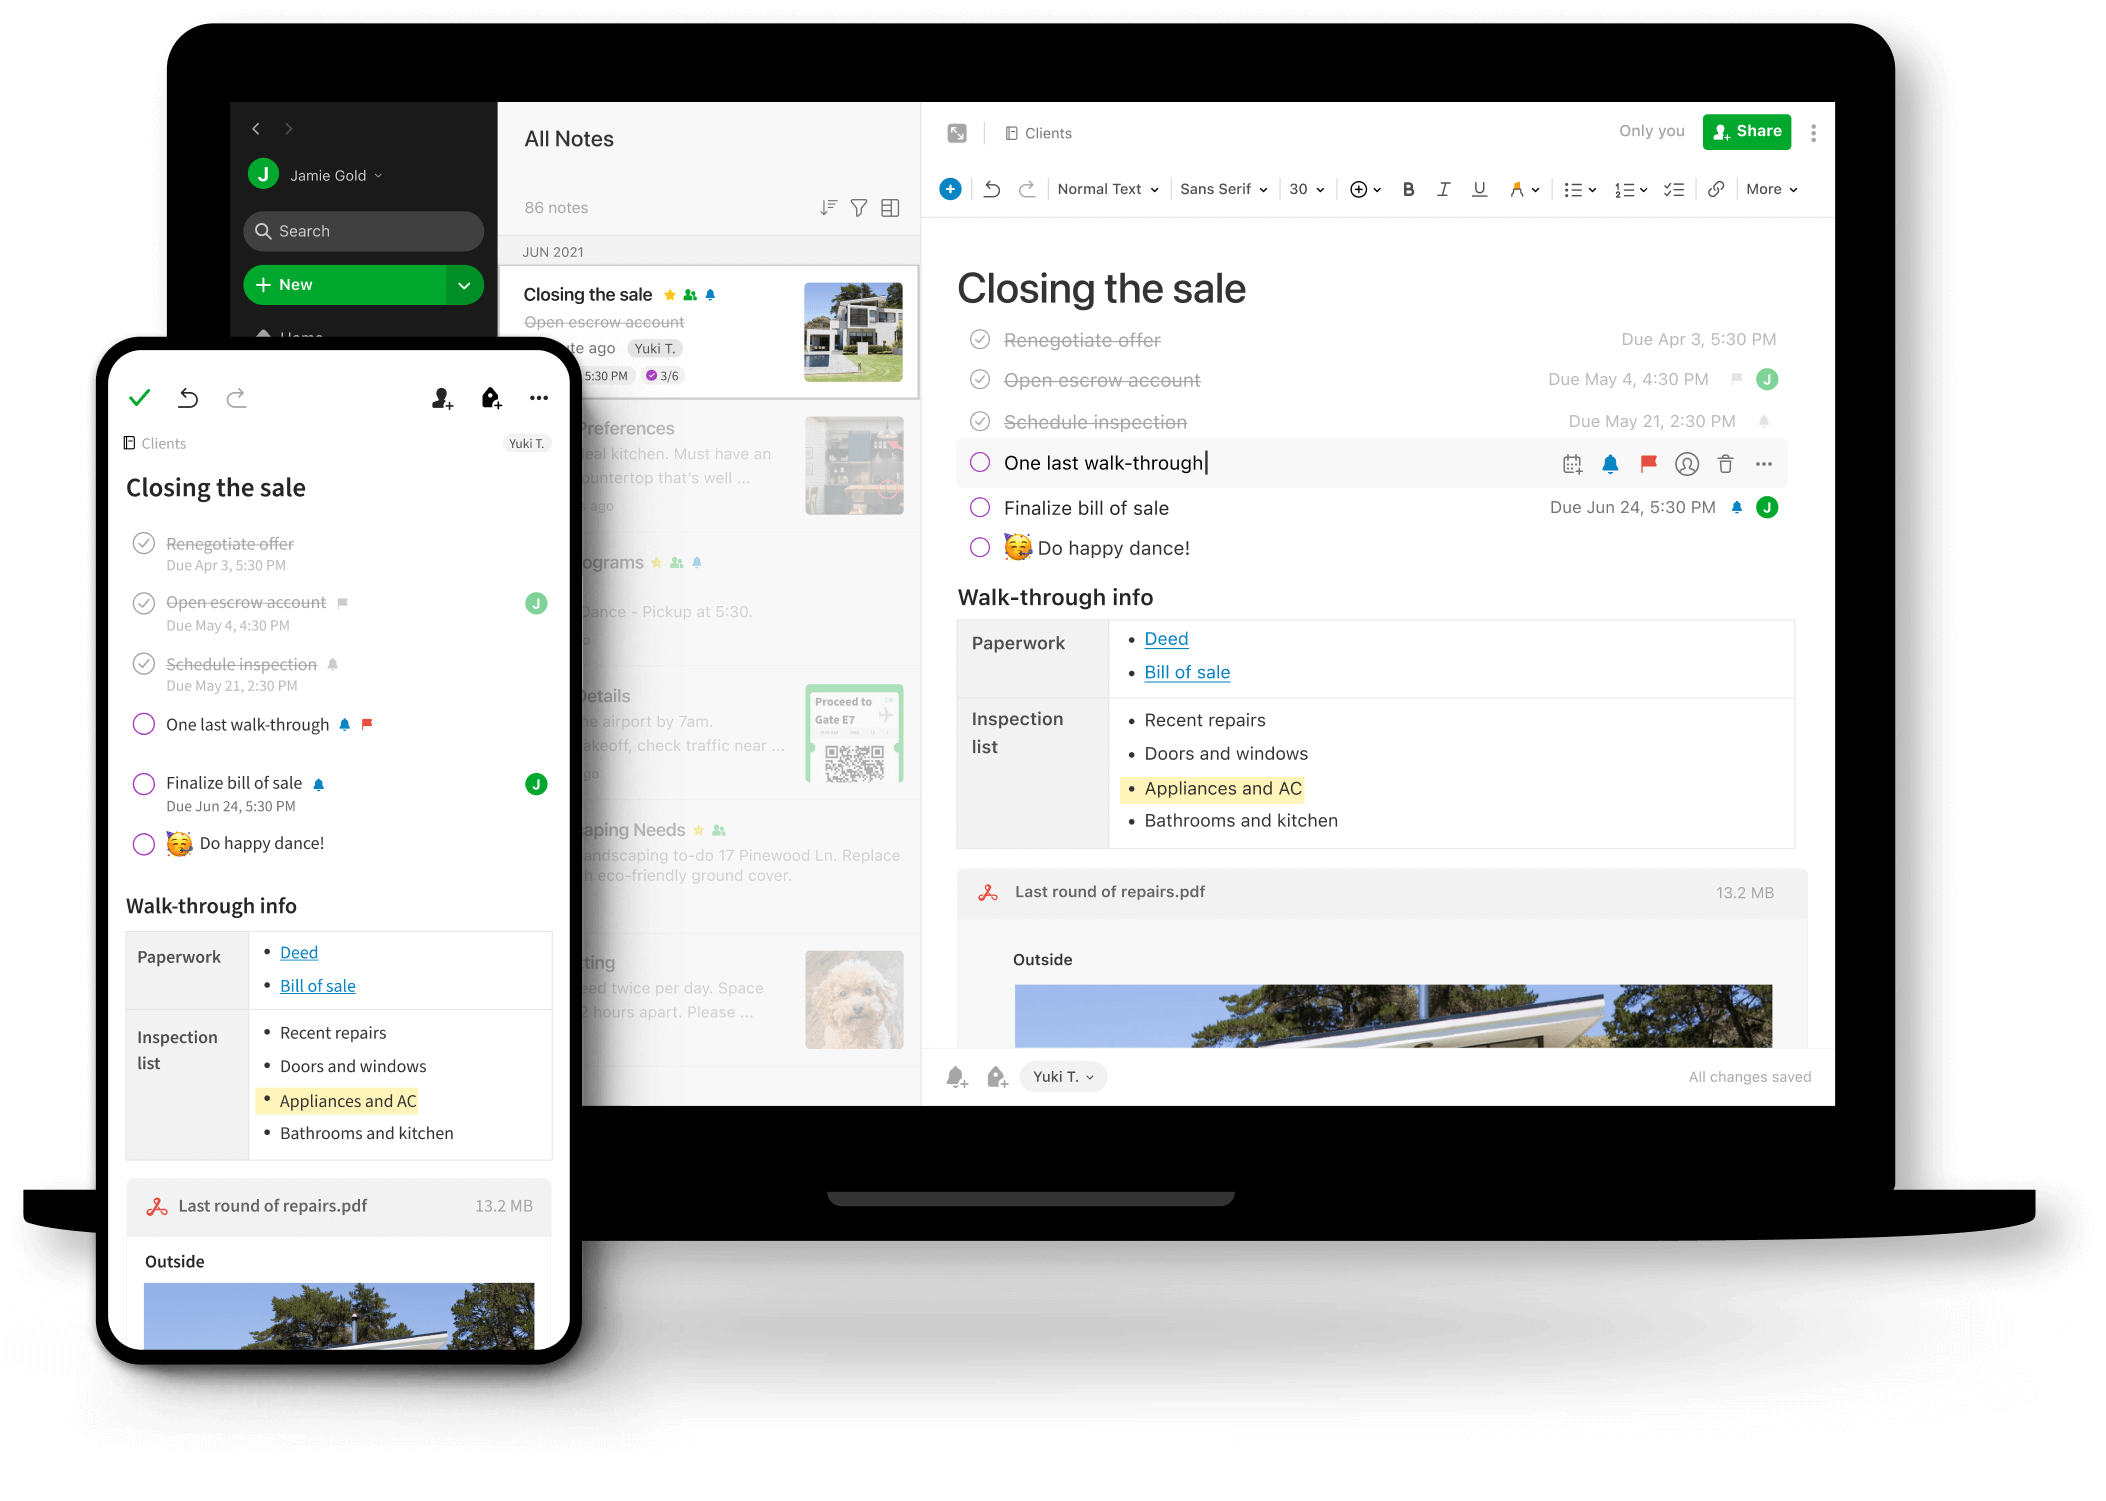 Evernote is available both as a web app and a mobile app